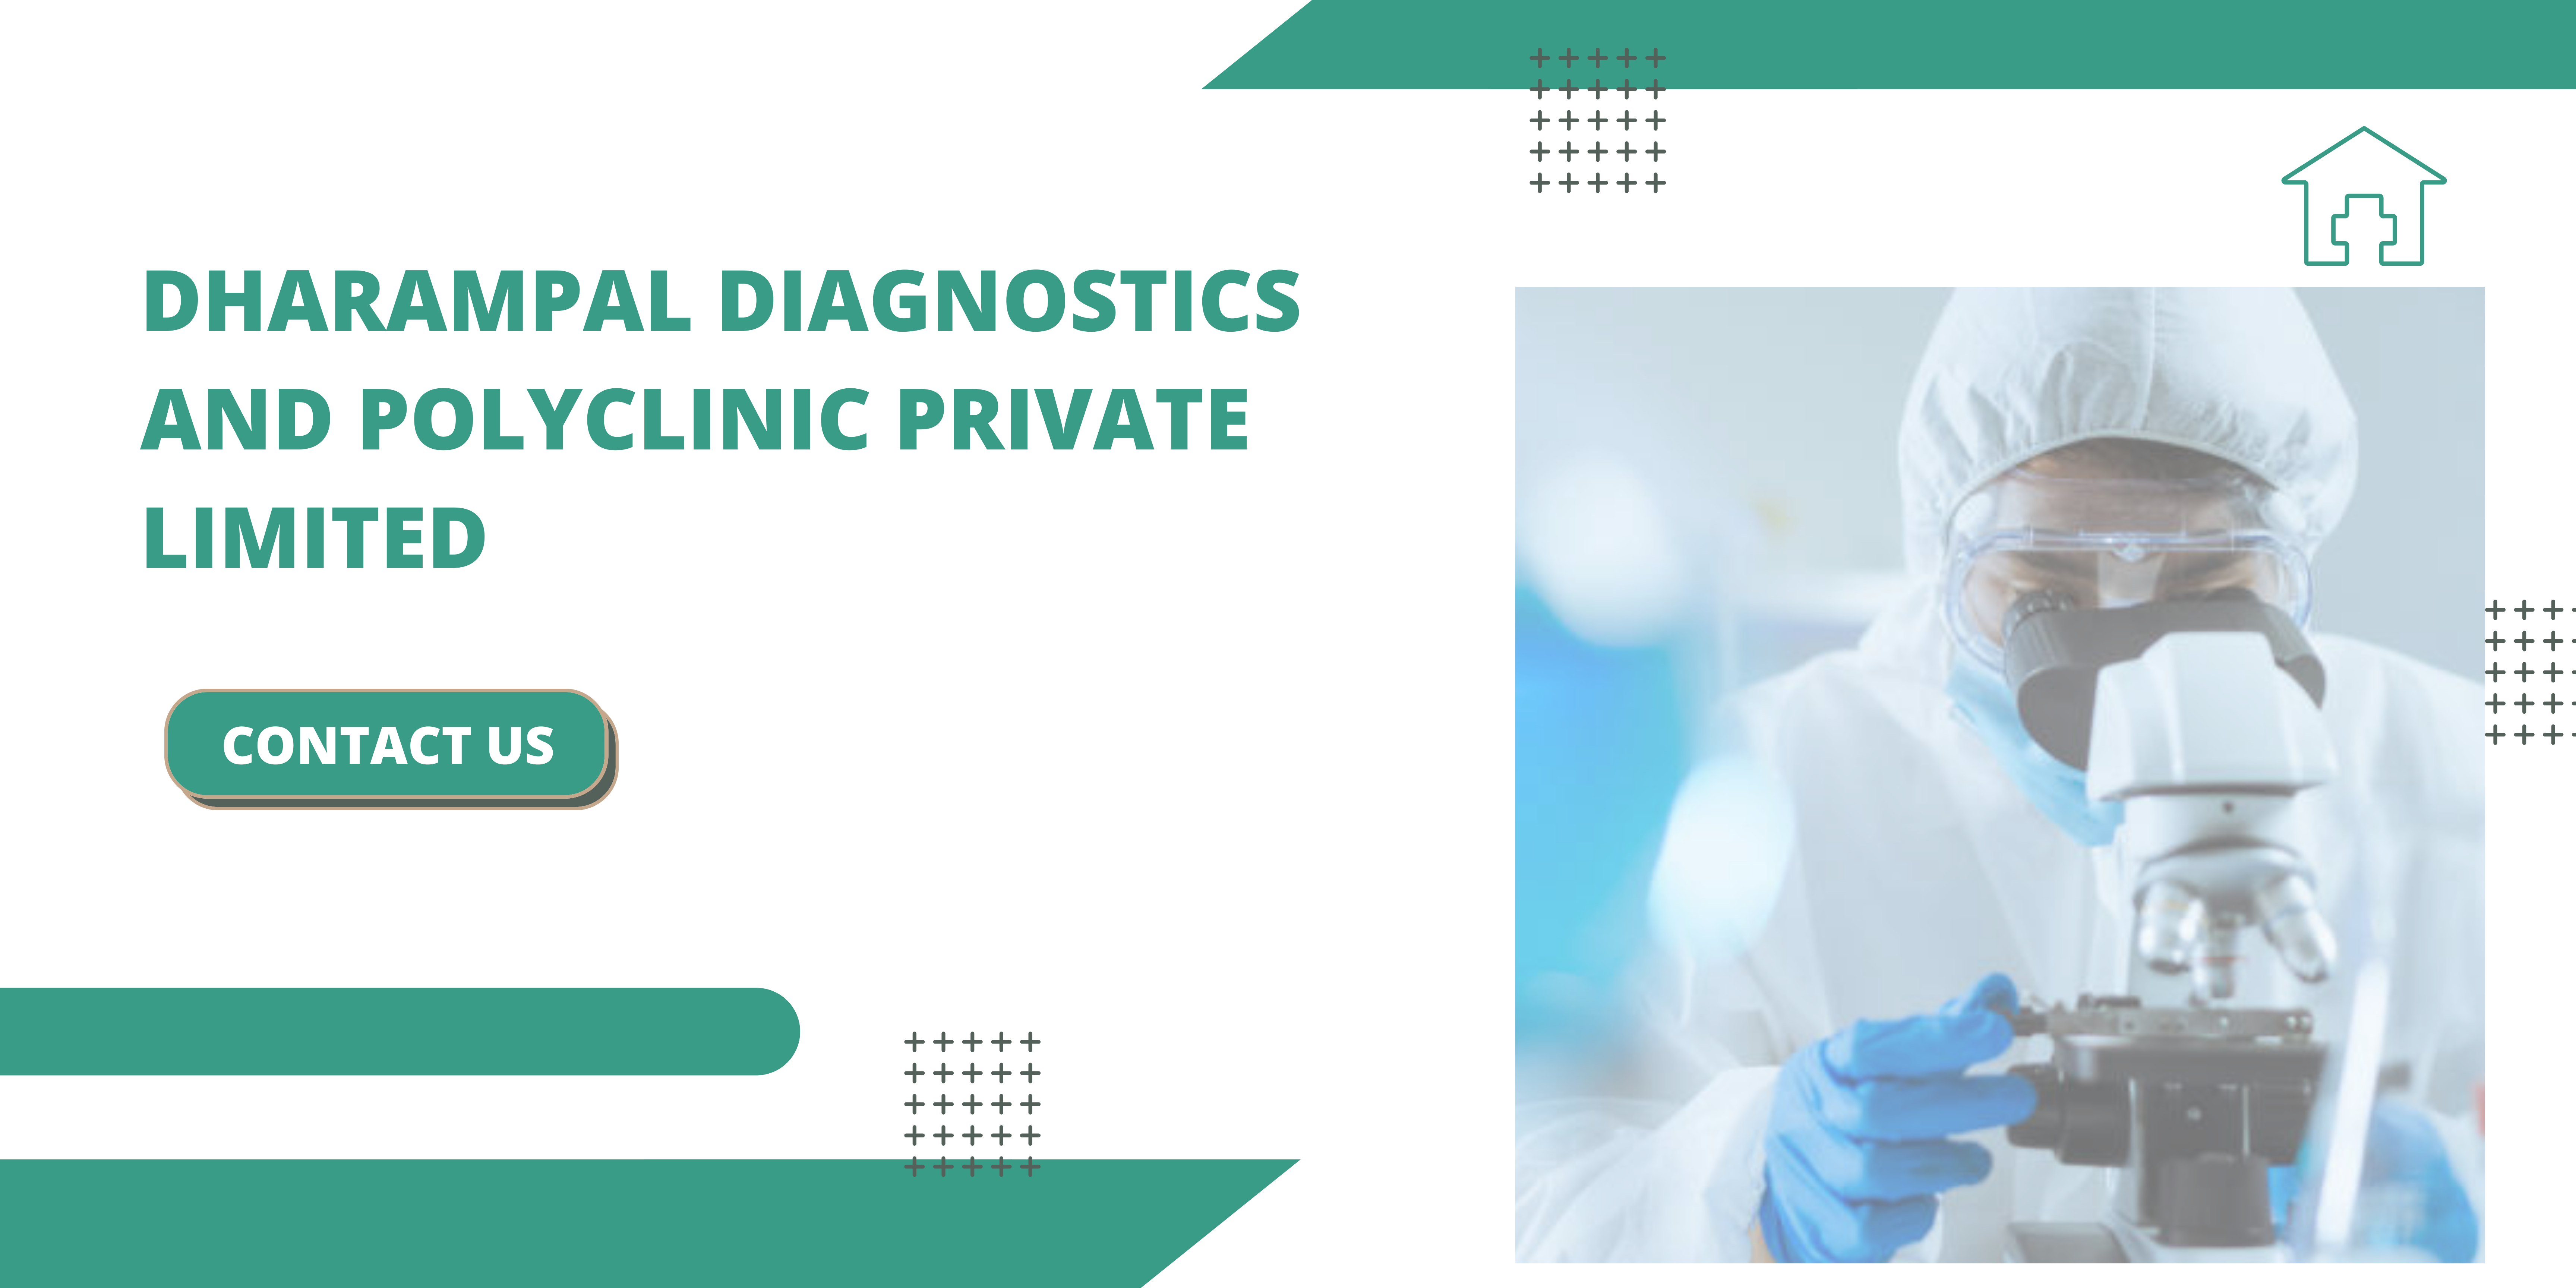 Dharampal Diagnostics and Polyclinic Private Limited